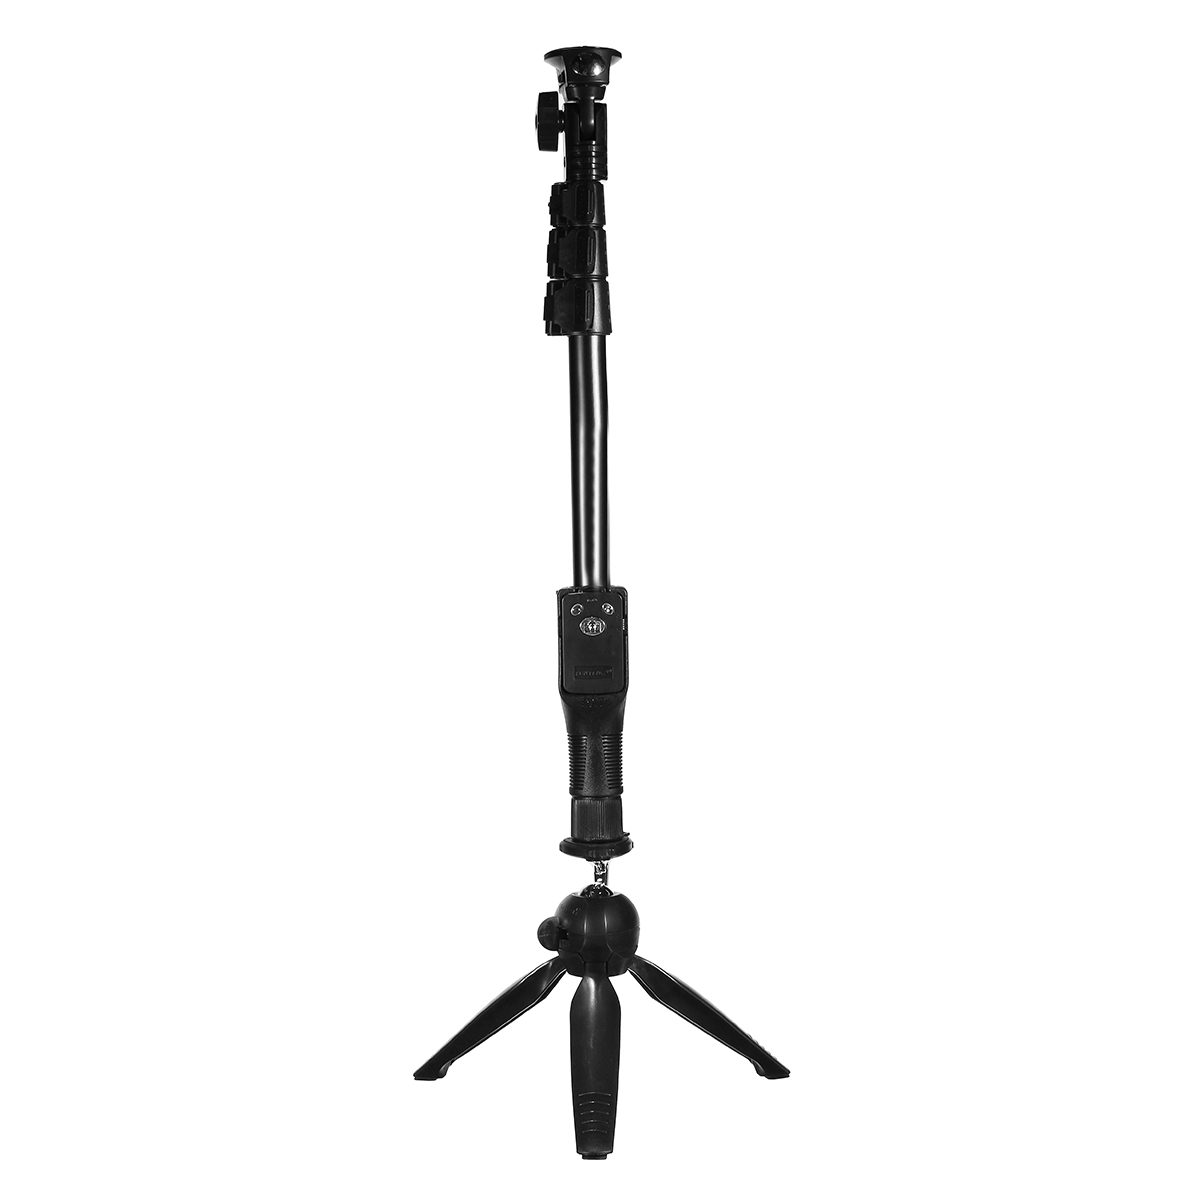 bluetooth-Wireless-Remote-Control-Extendable-Handheld-Selfie-Stick-Monopod--Tripod-for-Camera-Mobile-1340611-12